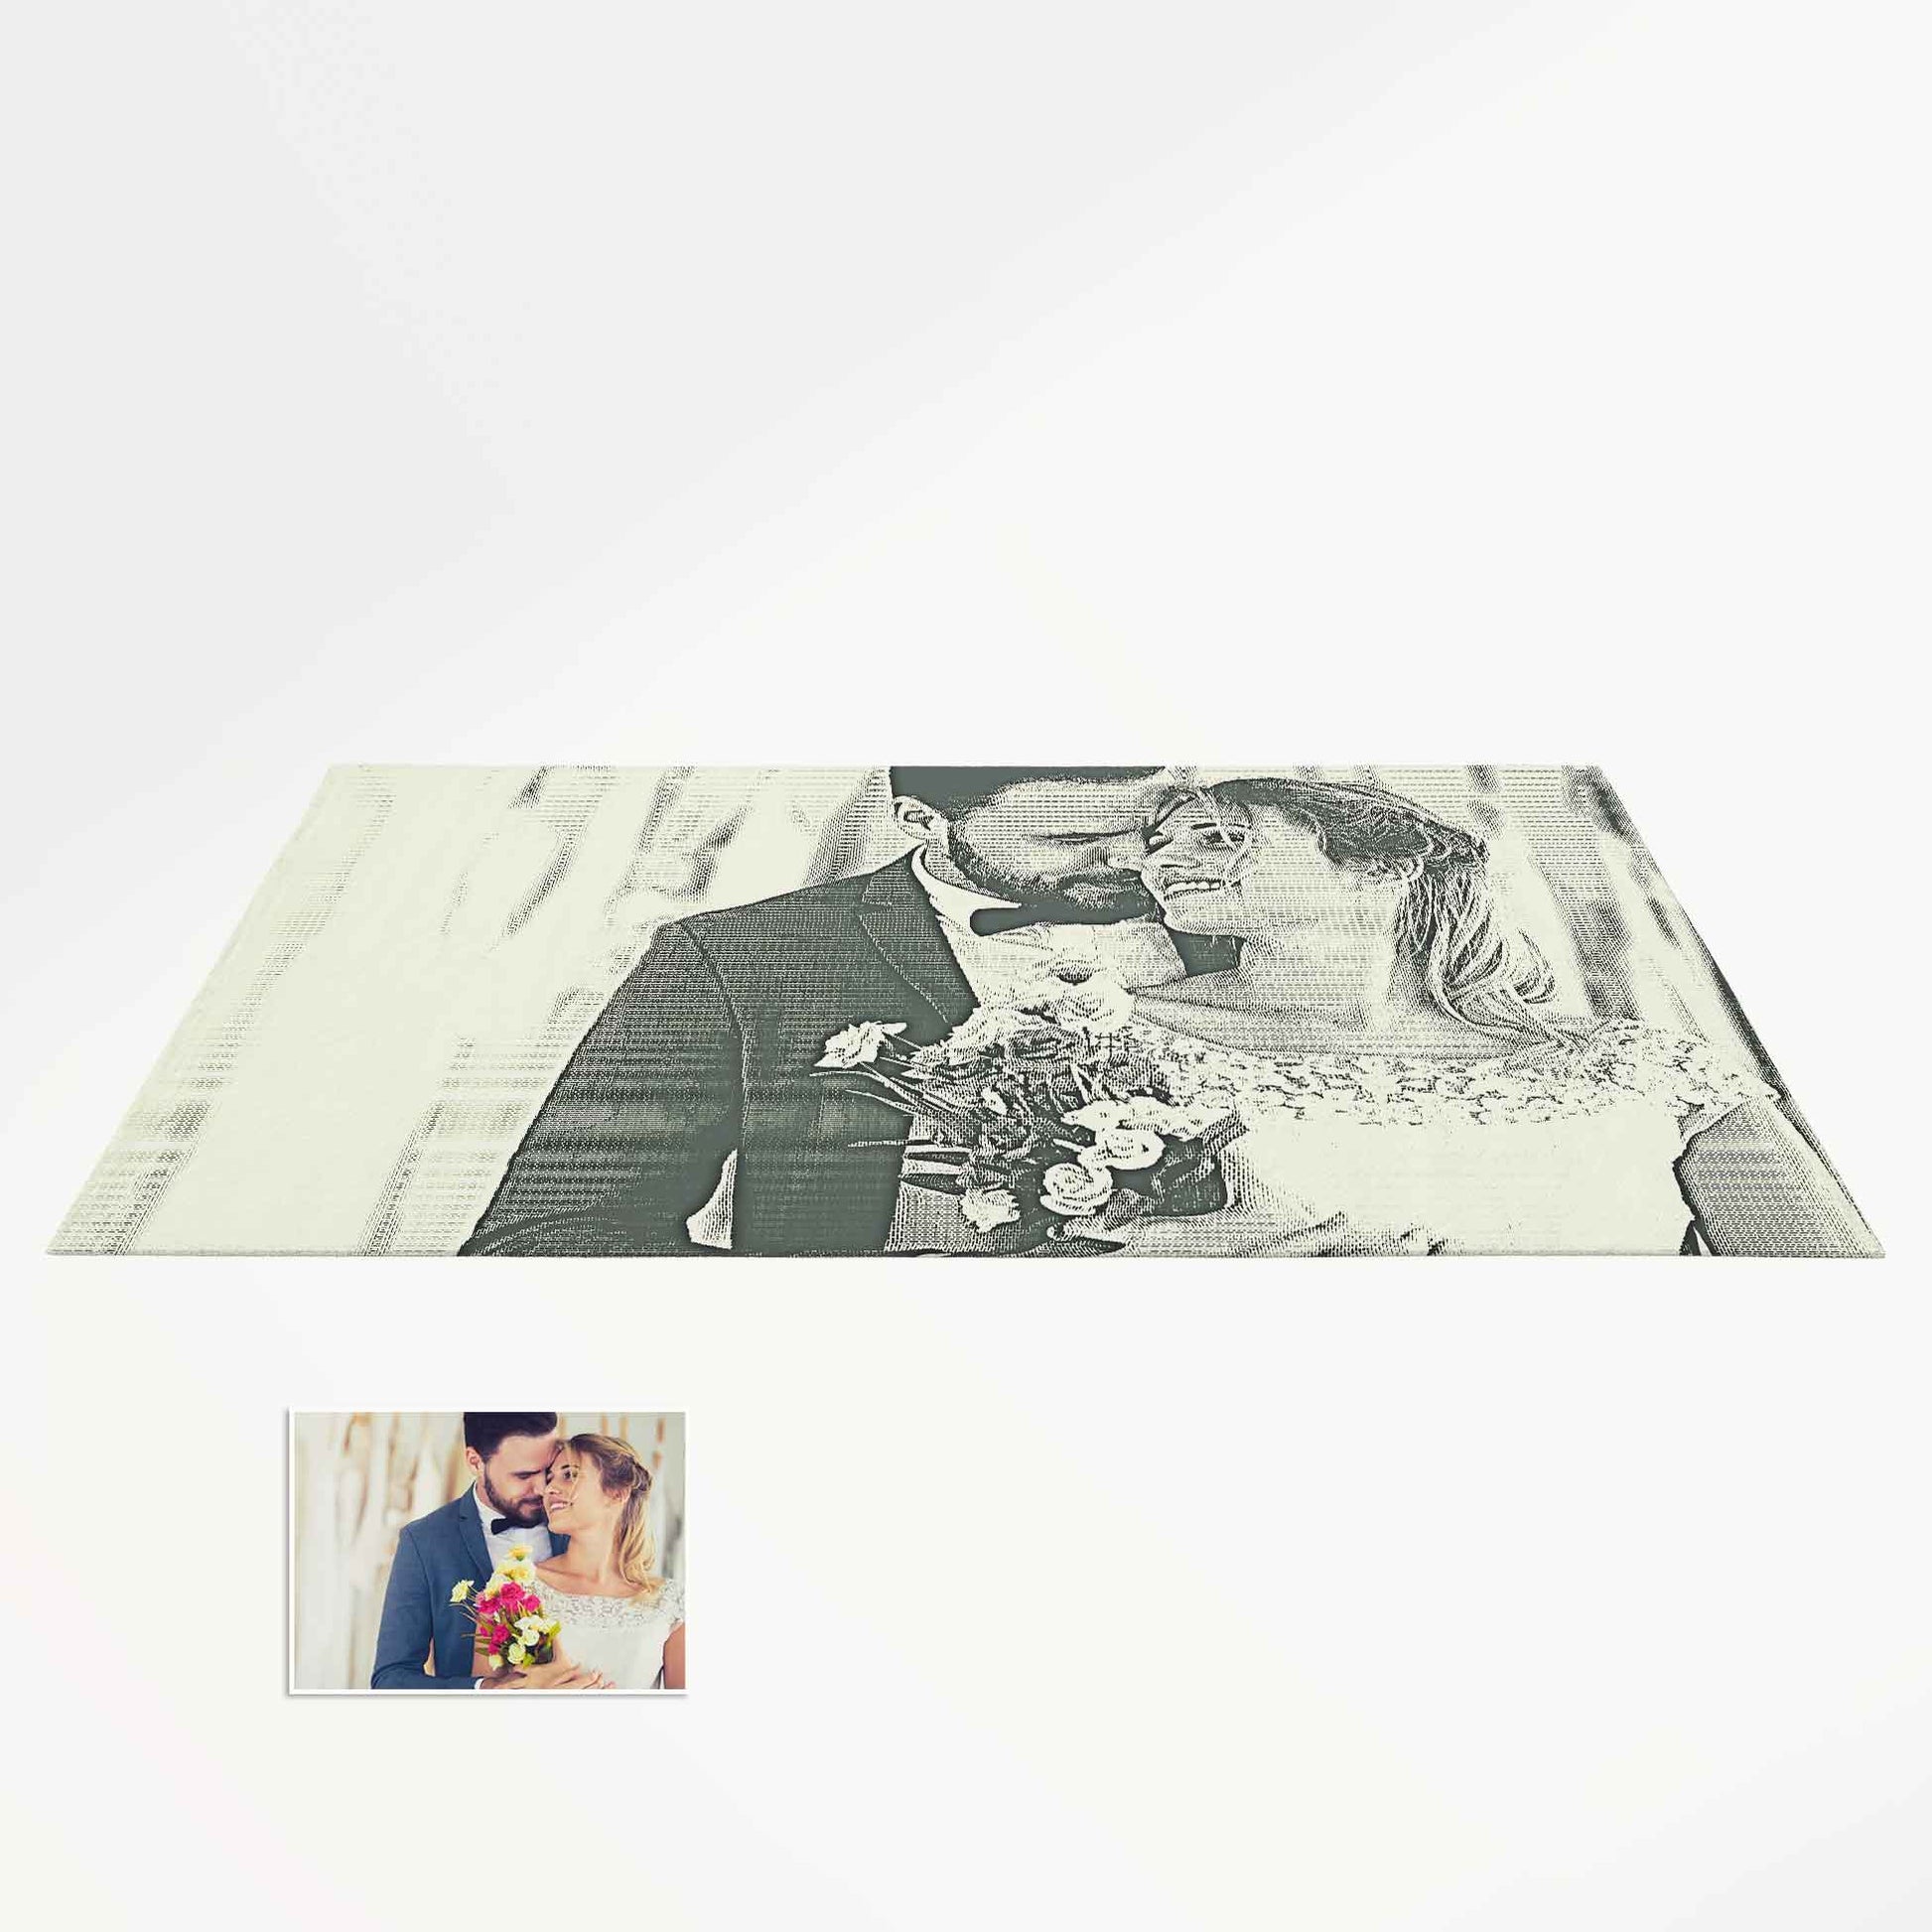 Create a sanctuary of abundance with our Personalised Money Engraved Photo Rug. Engrave your memories in opulence and meaning